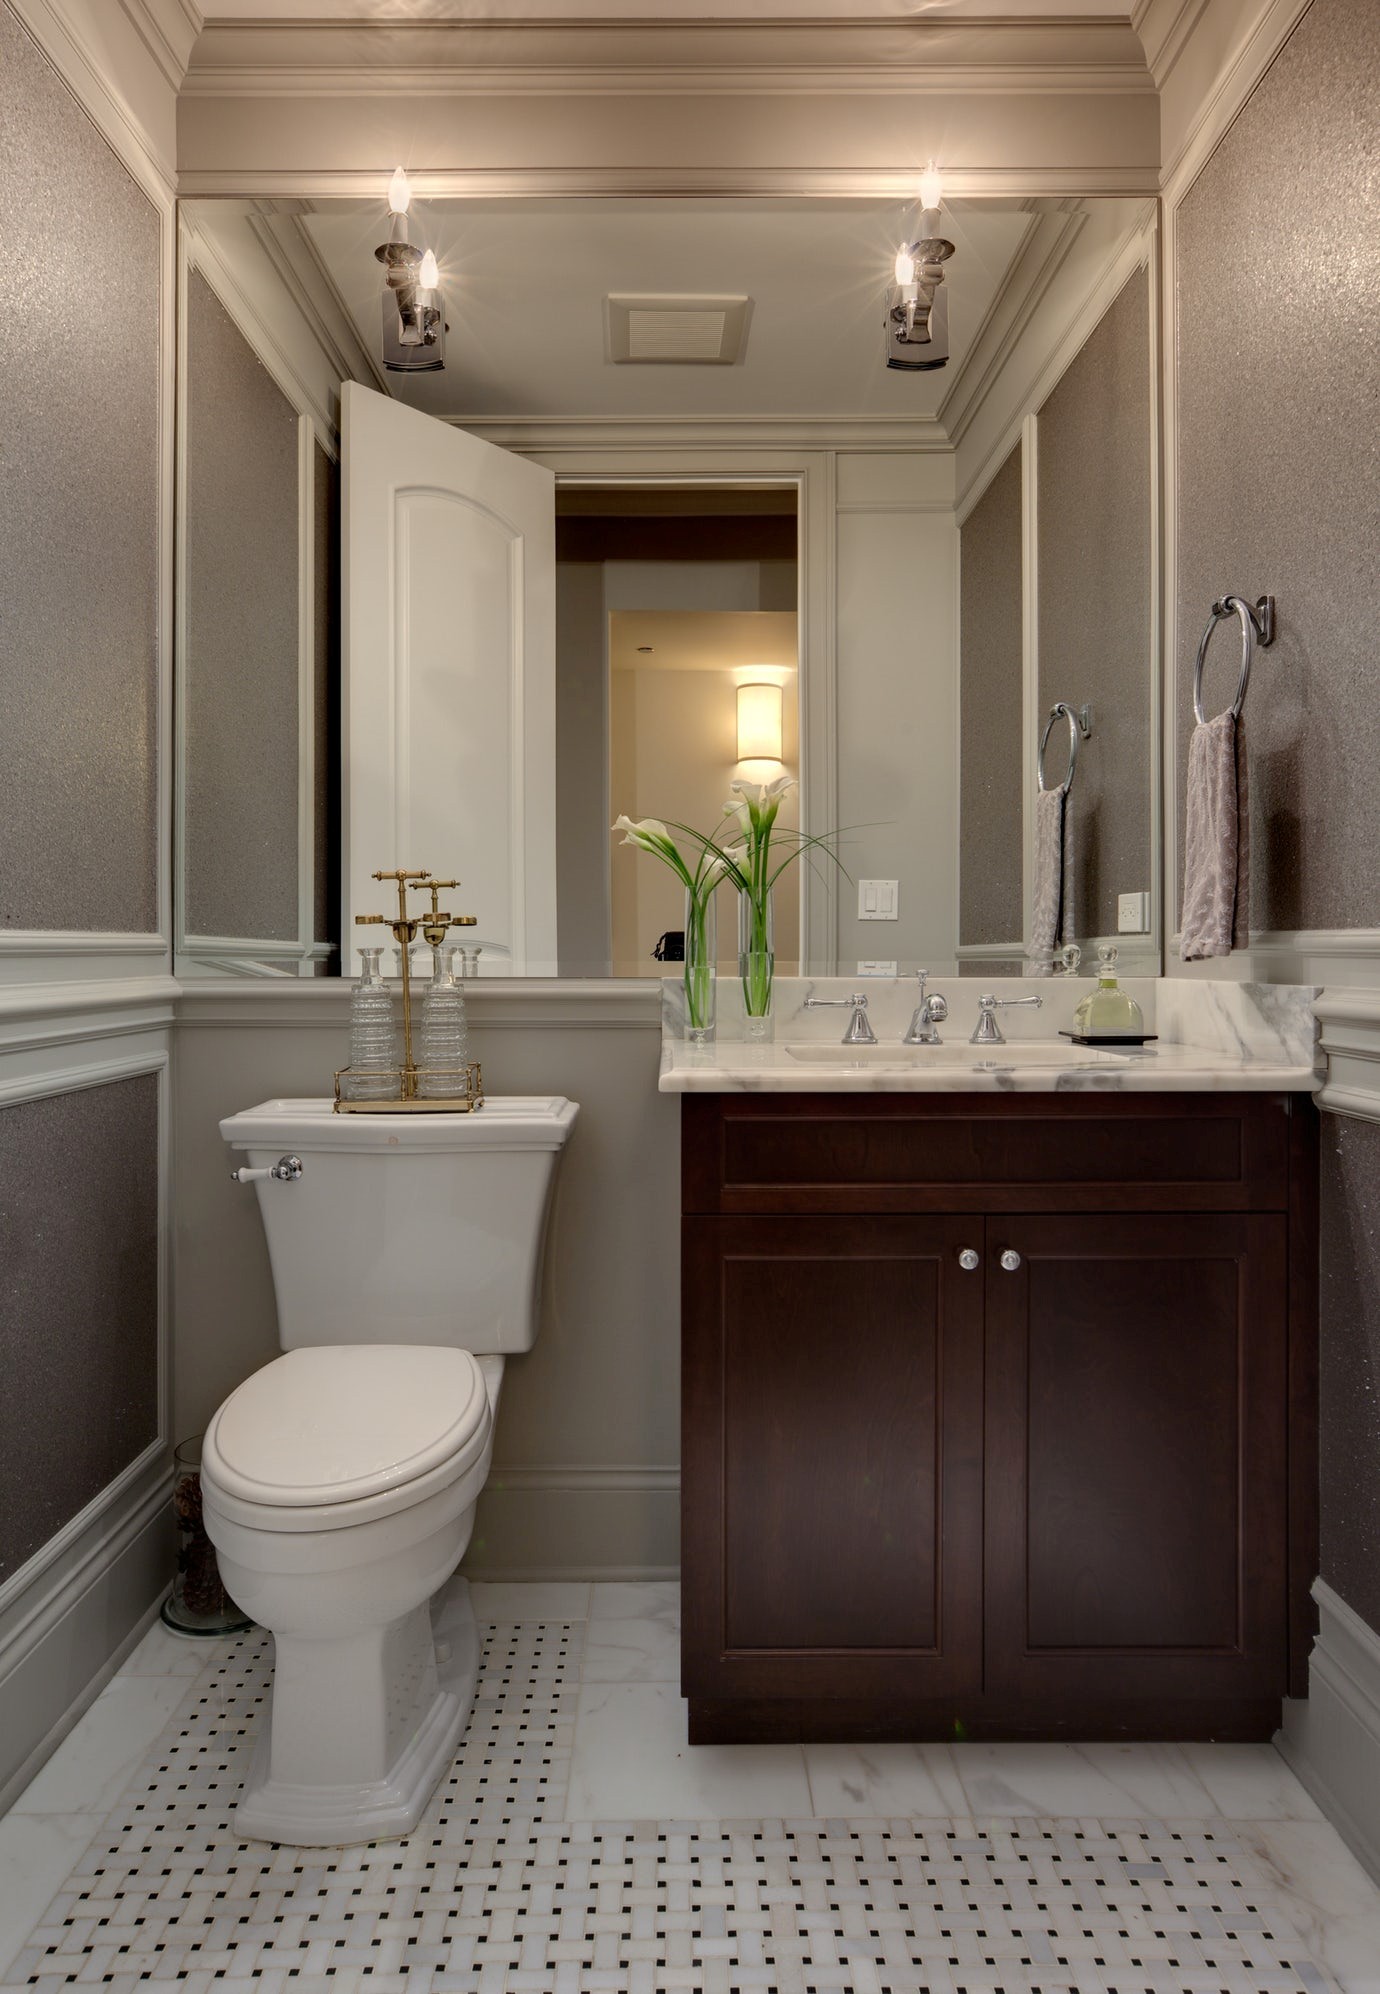 13 Bathroom Mirror Ideas To Spice Things Up - Home Decorated